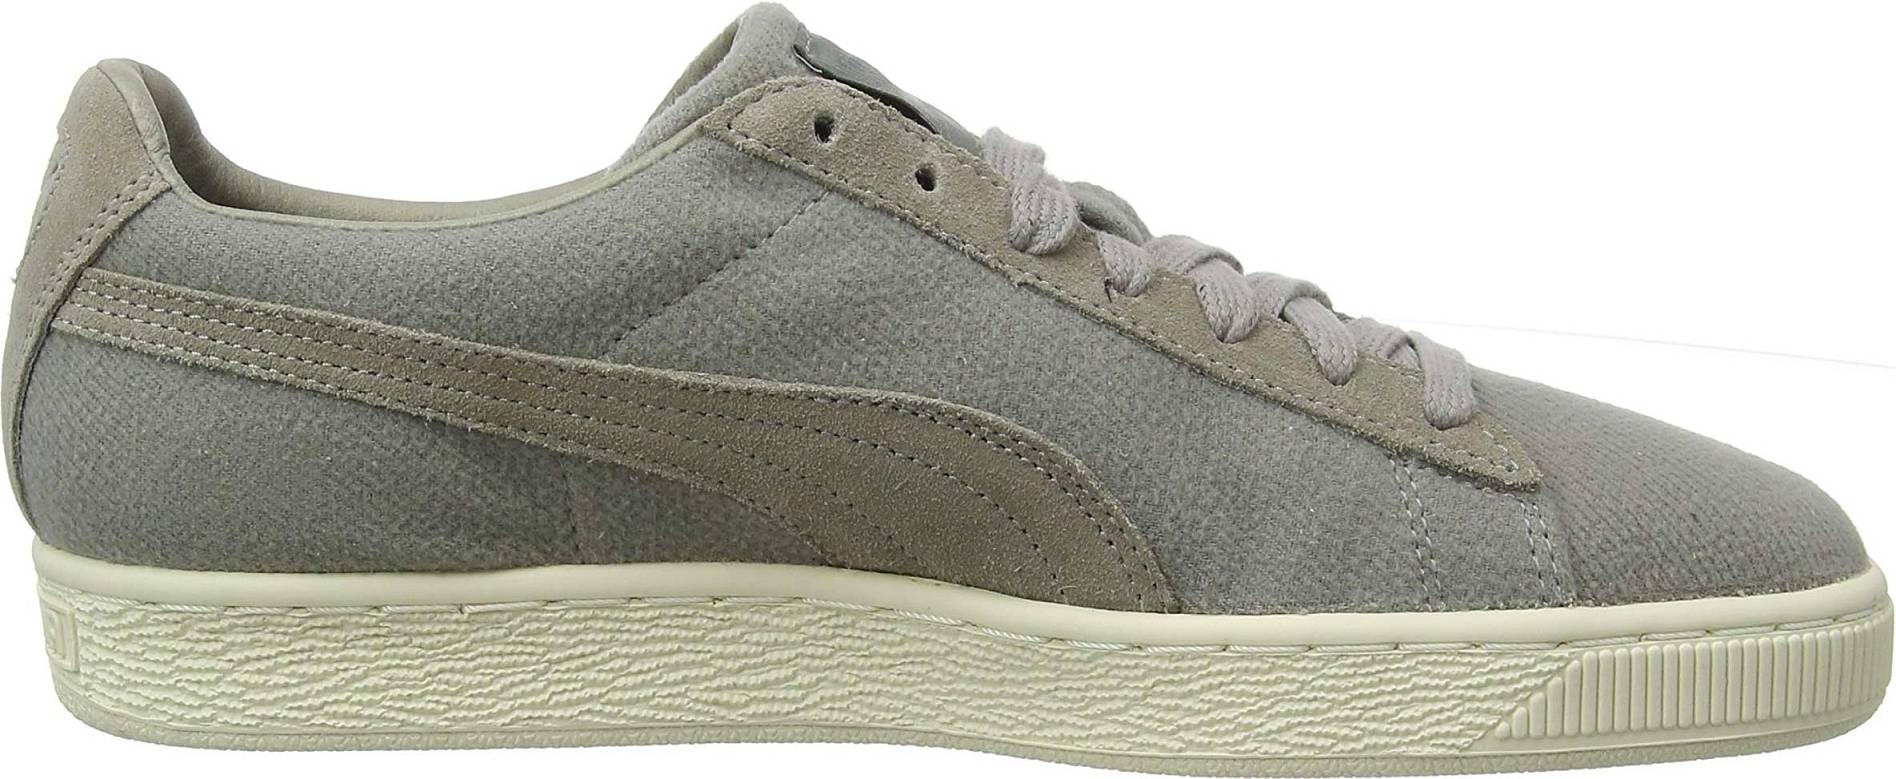 Puma Basket Classic Cocoon – Shoes Reviews & Reasons To Buy